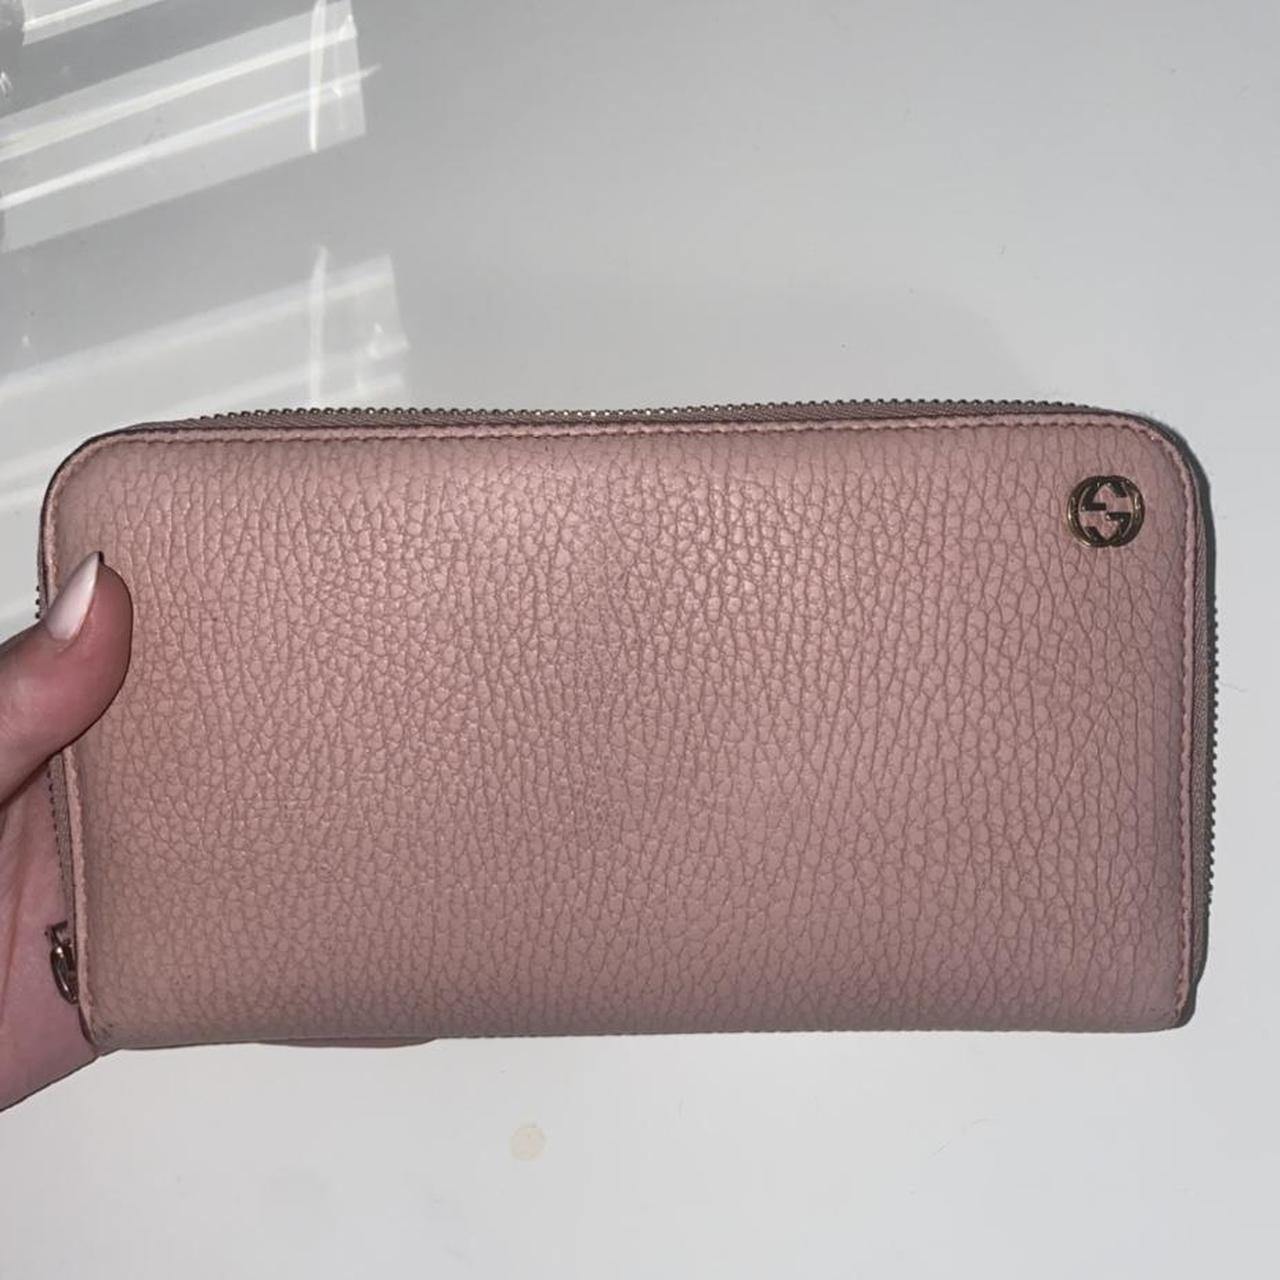 Gucci Authenticated Leather Purse